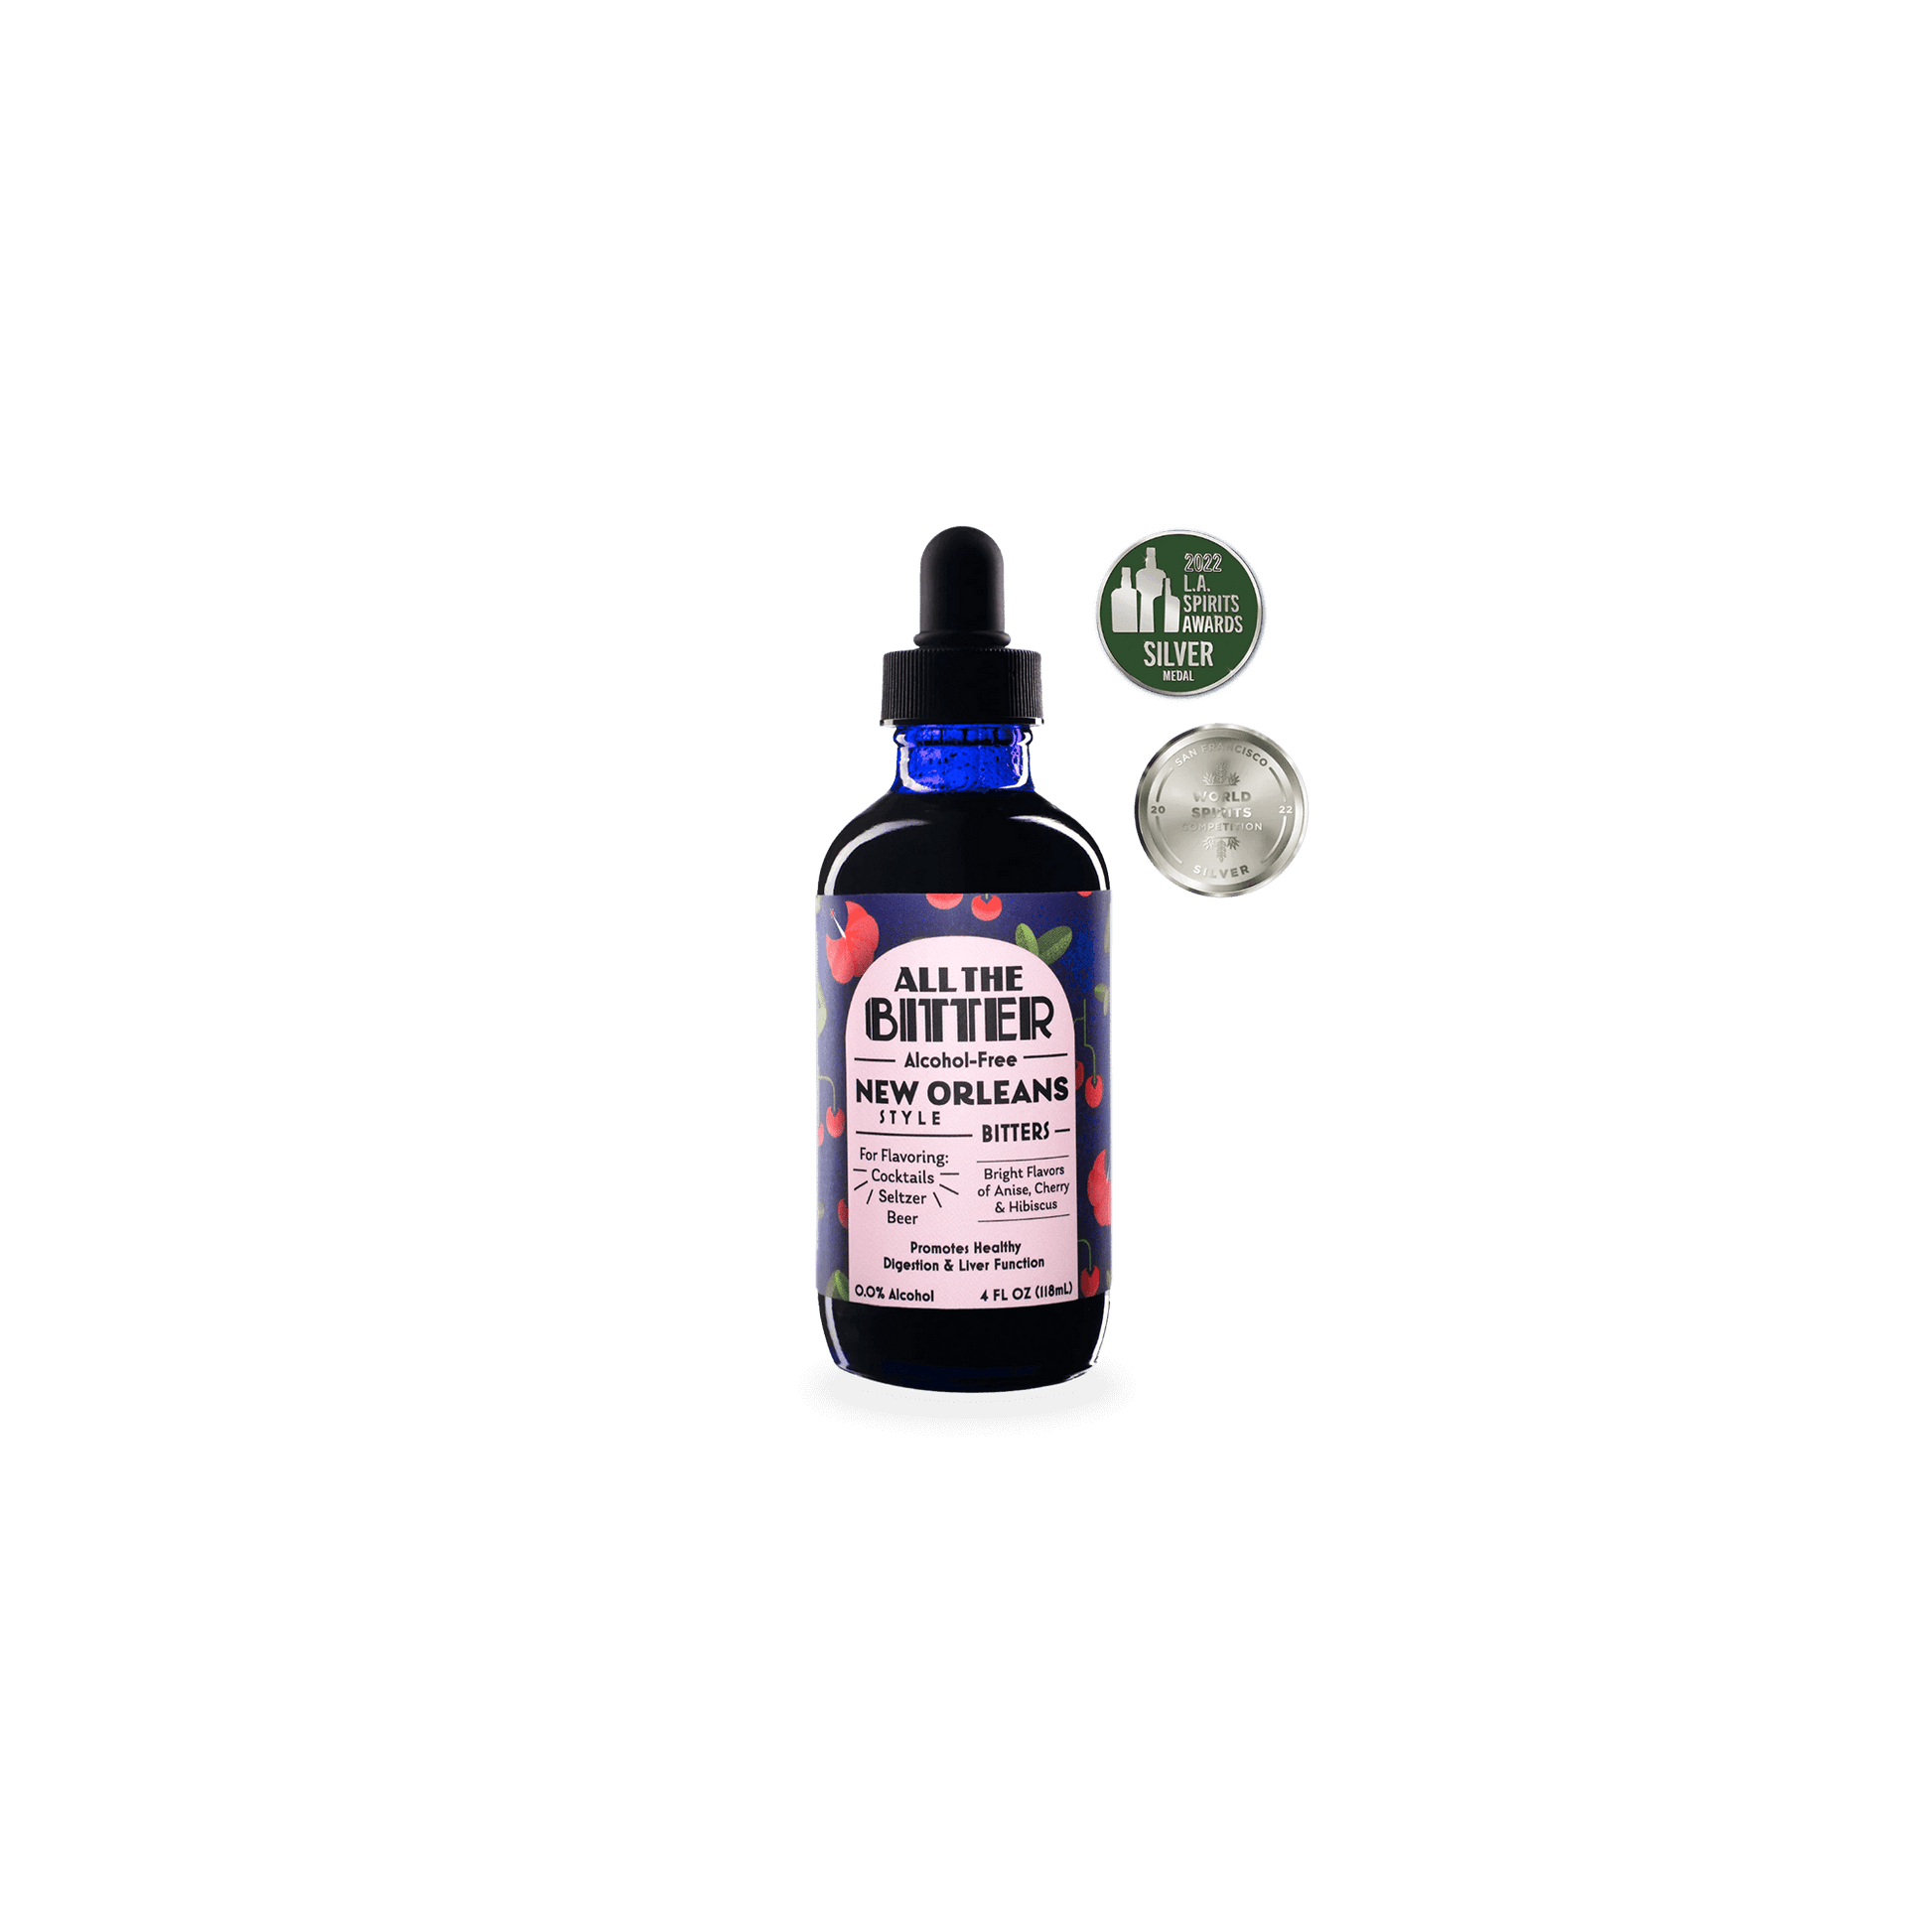 All the Bitter | New Orleans Non Alcoholic Bitters bottle